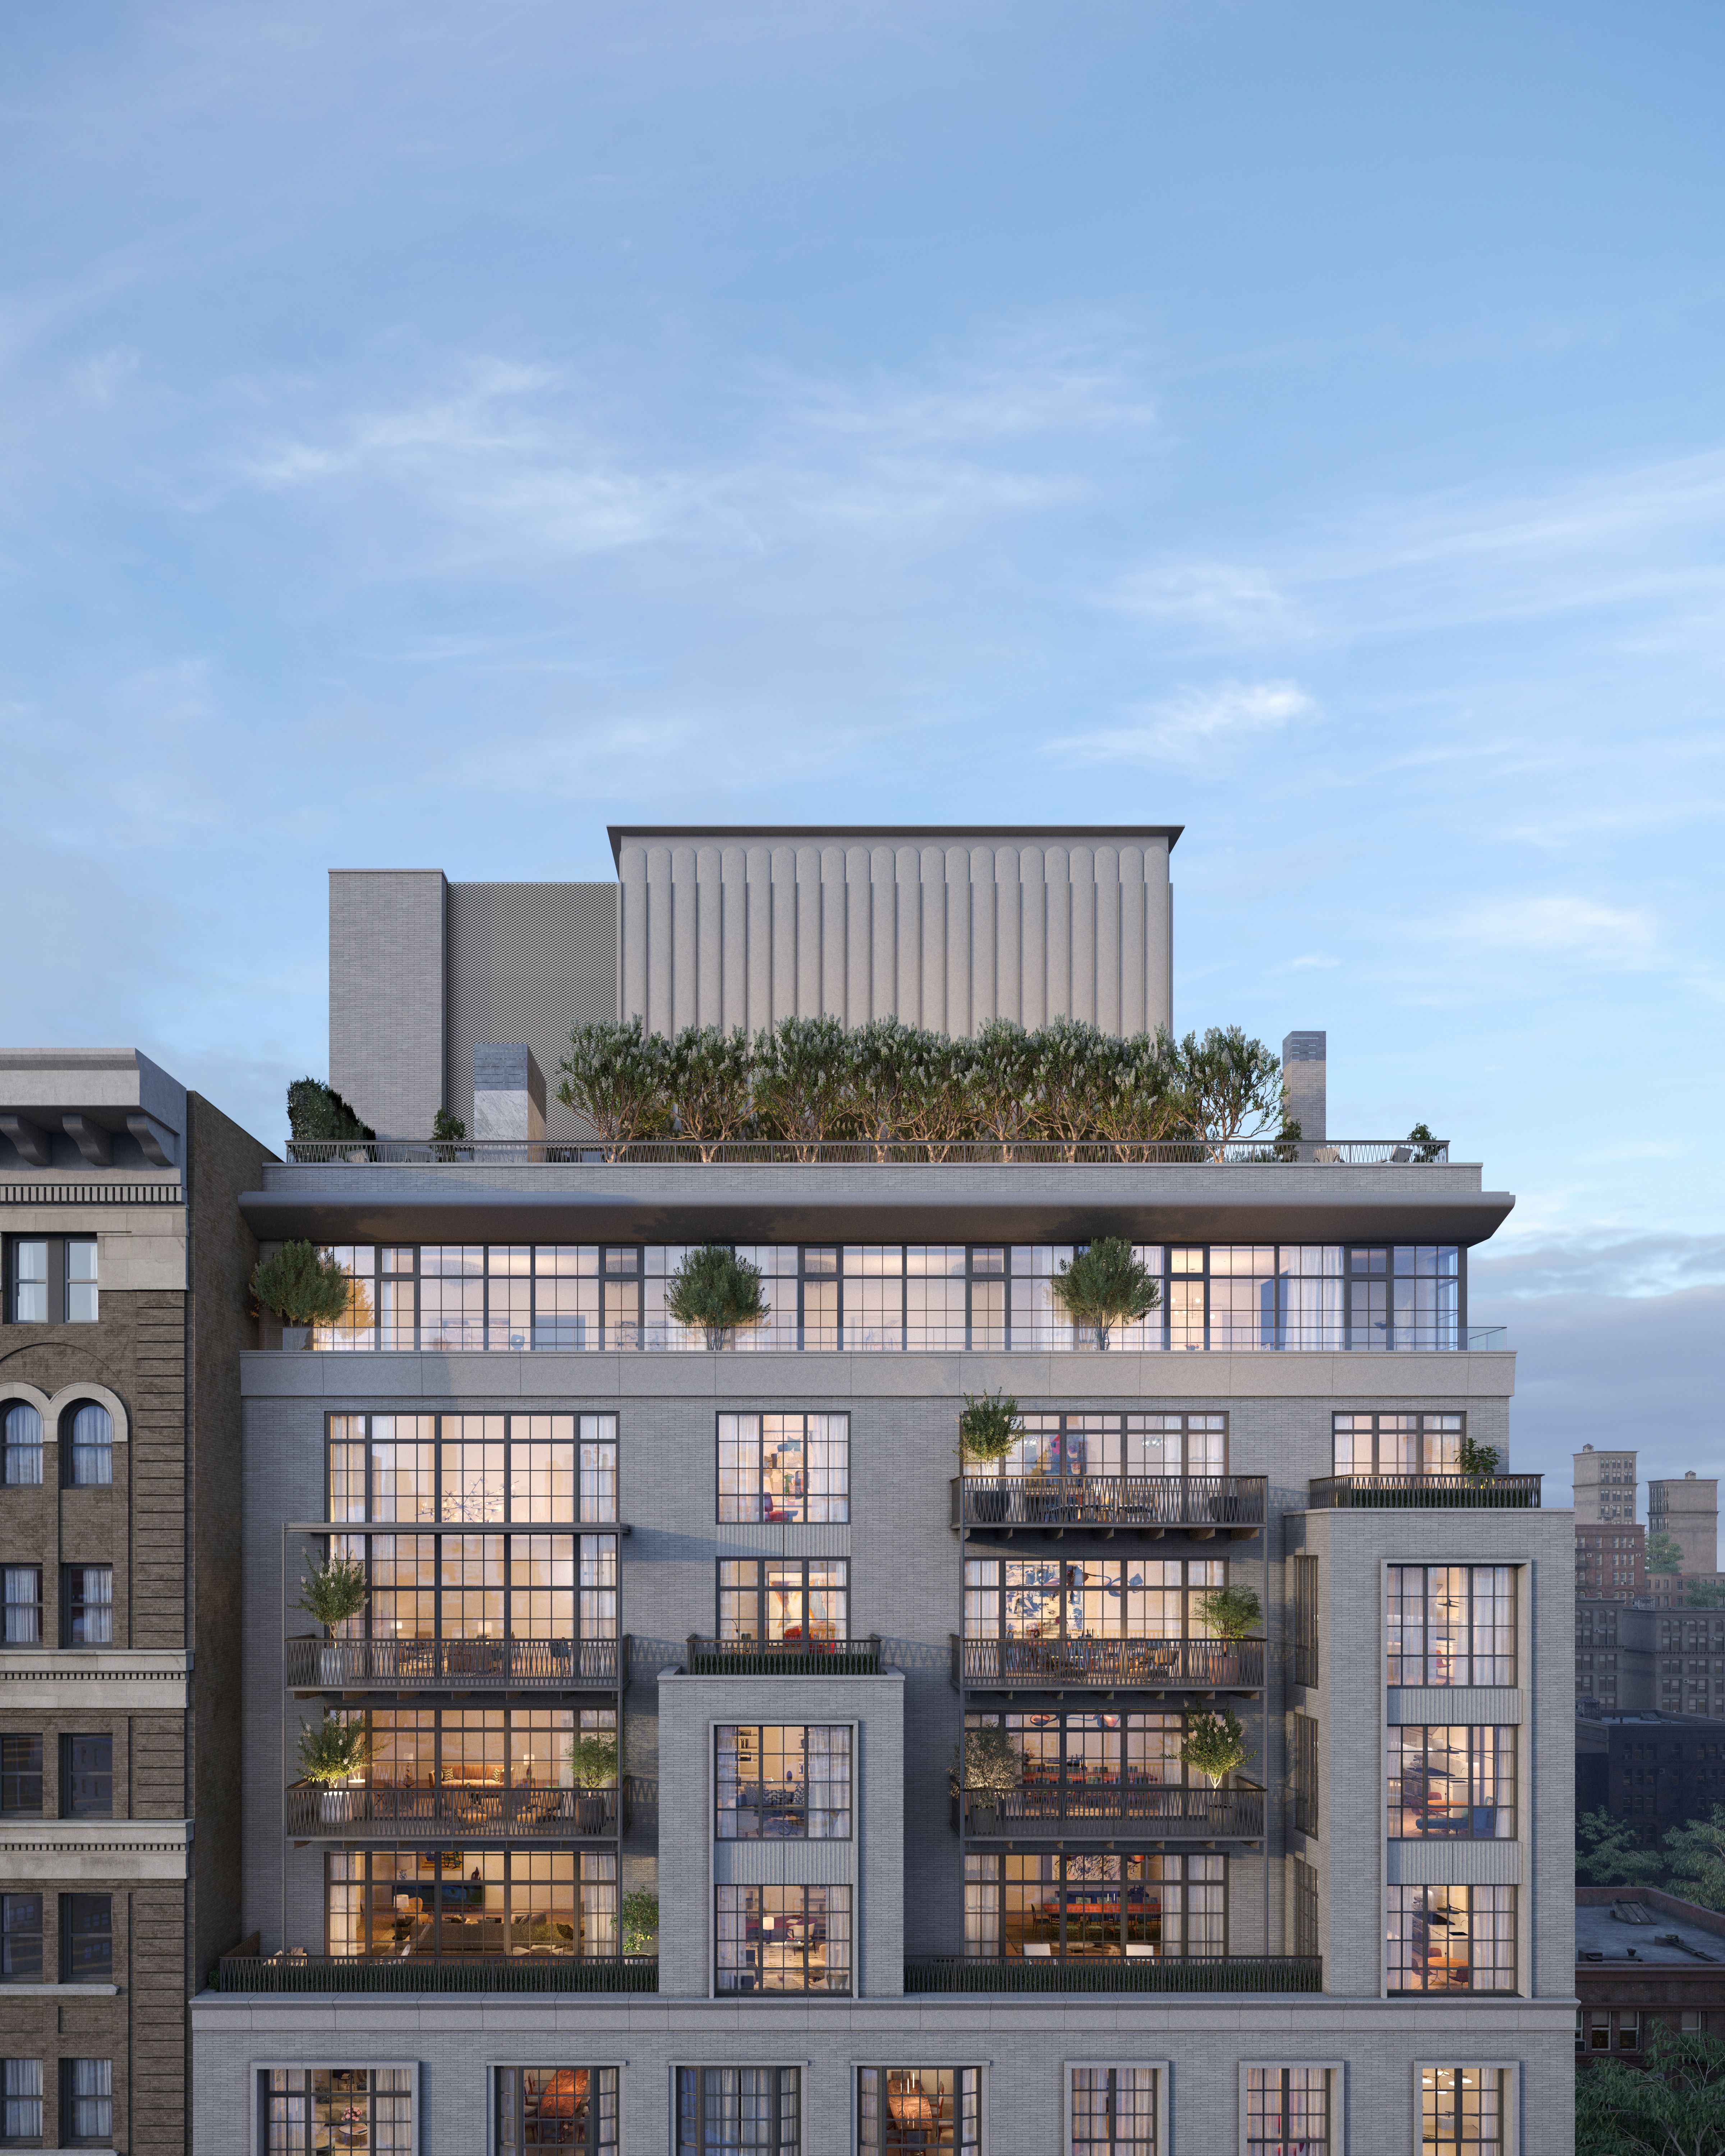 Full-floor Penthouses offer gracious outdoor spaces and sweeping expanses of grandly-scaled casement windows